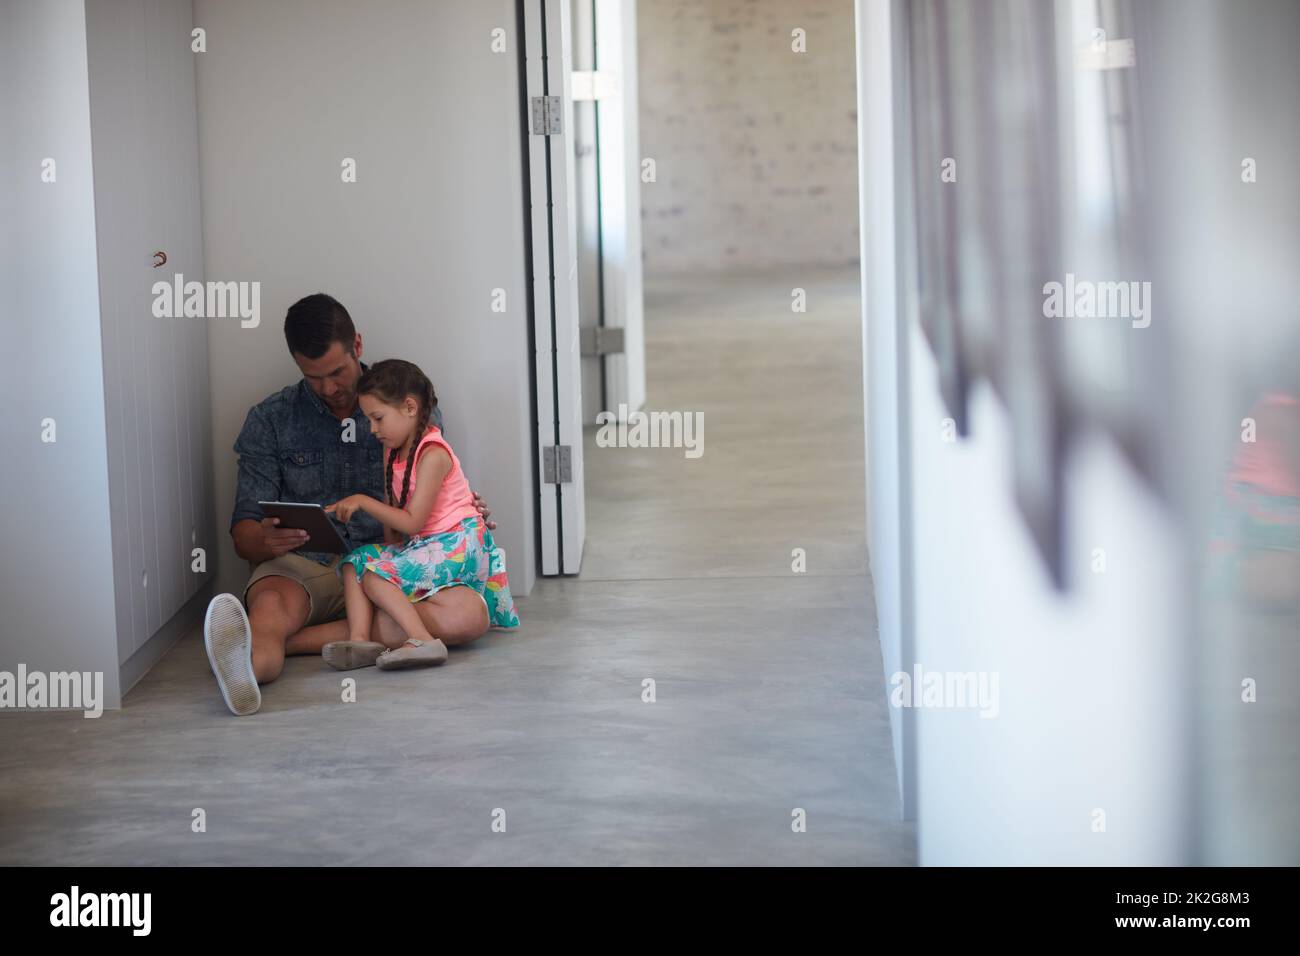 Online for some entertainment. Shot of a father and daughter spending time together at home. Stock Photo